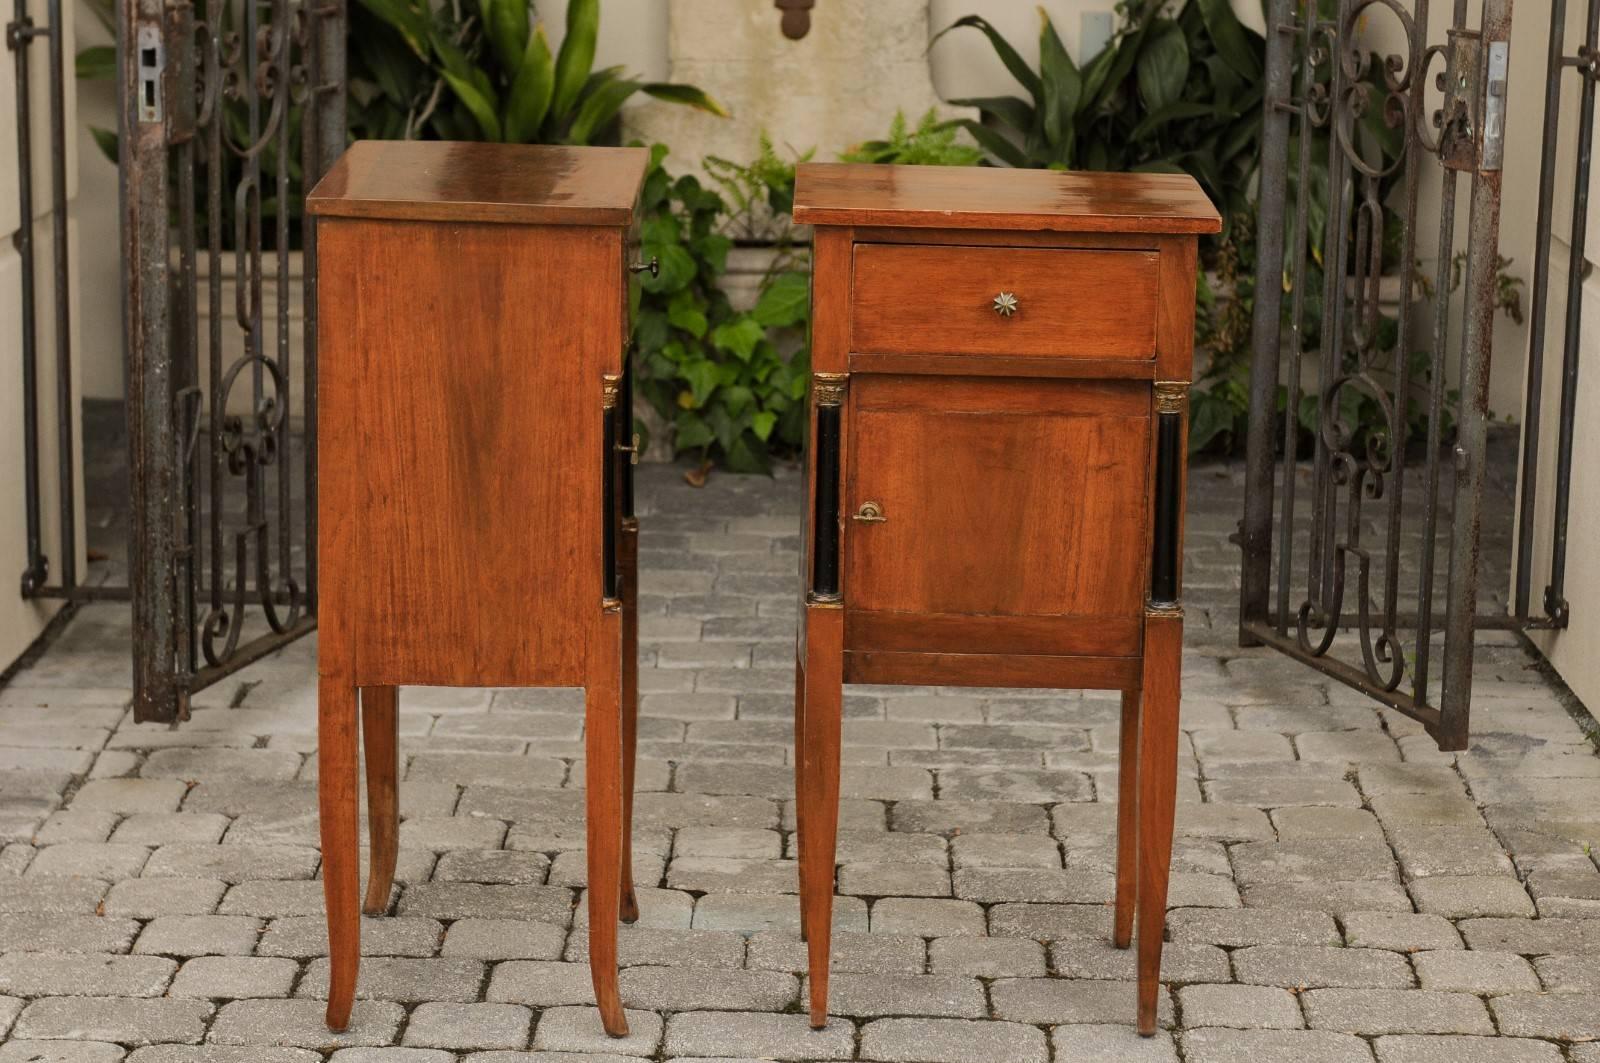 Pair of 1840s Biedermeier Walnut Stands with Drawer, Door and Semi-Columns For Sale 1